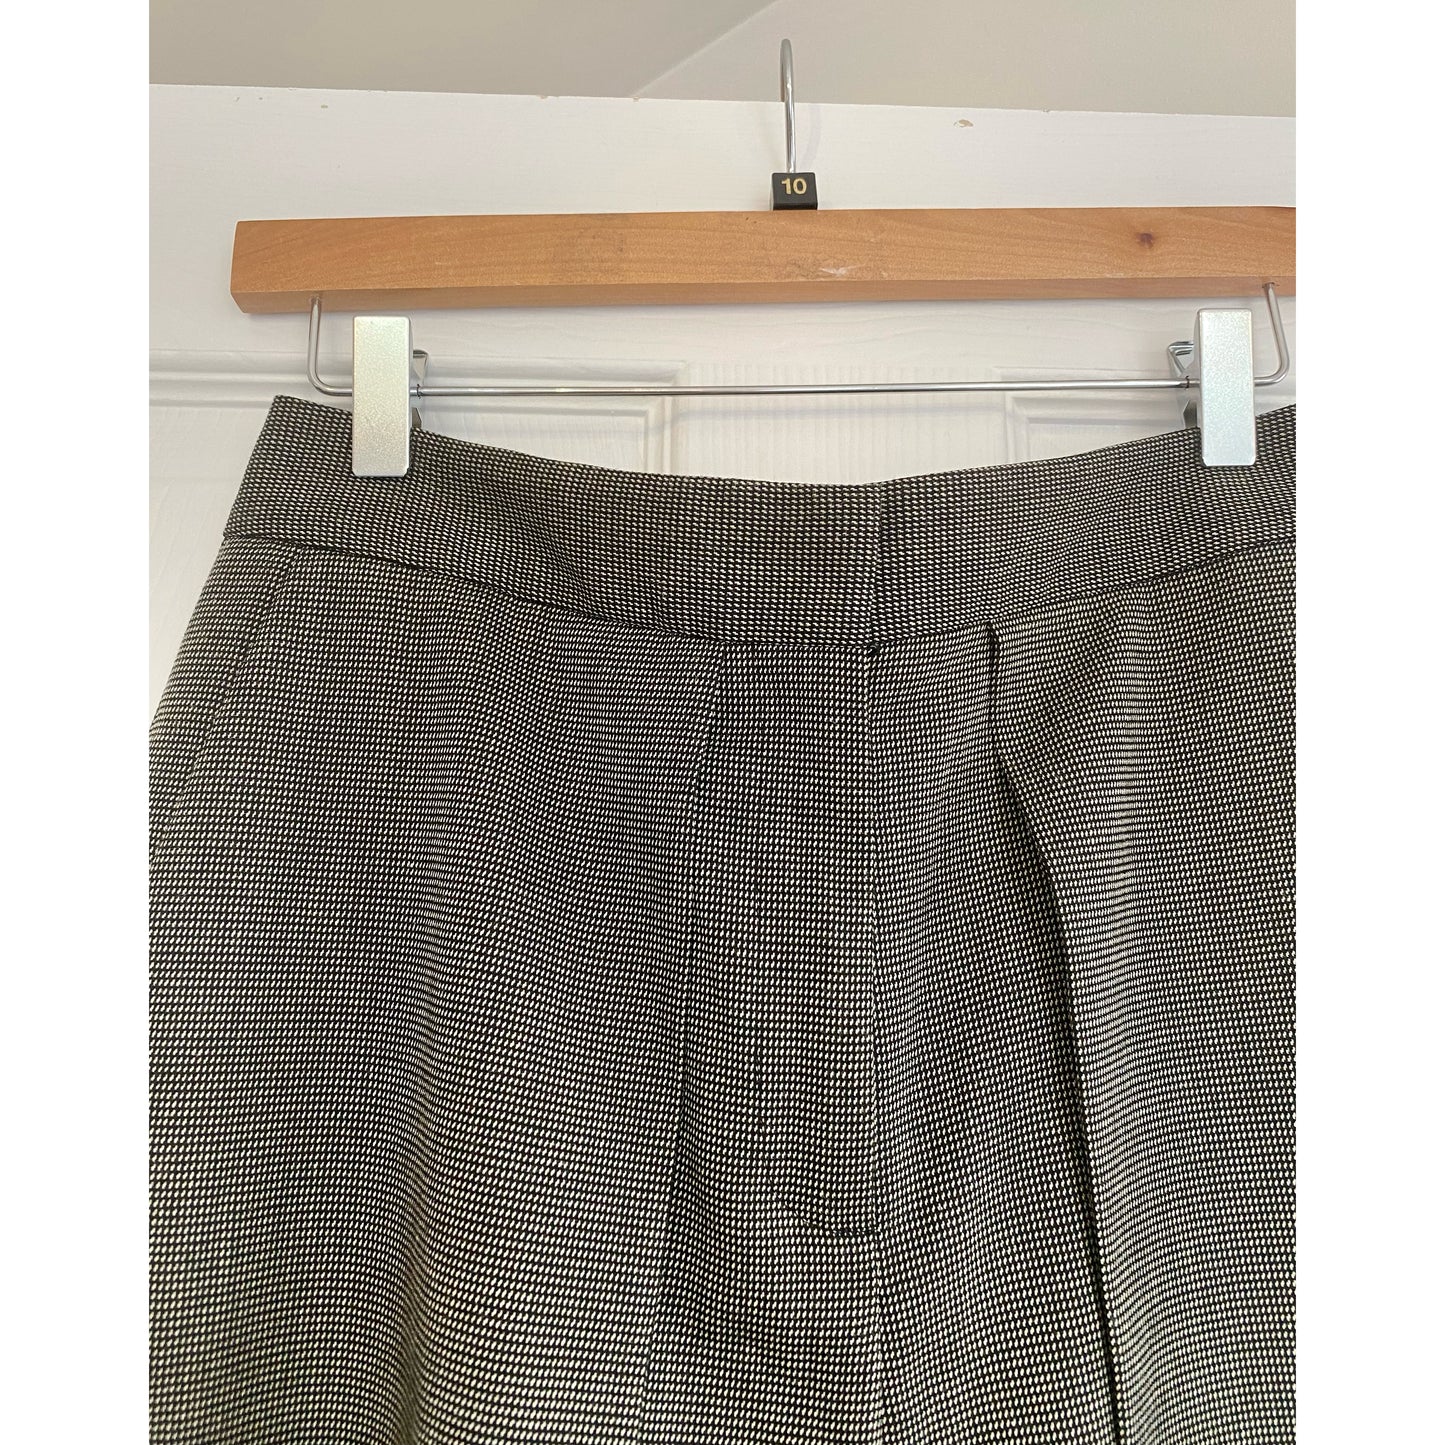 French Connection Trousers